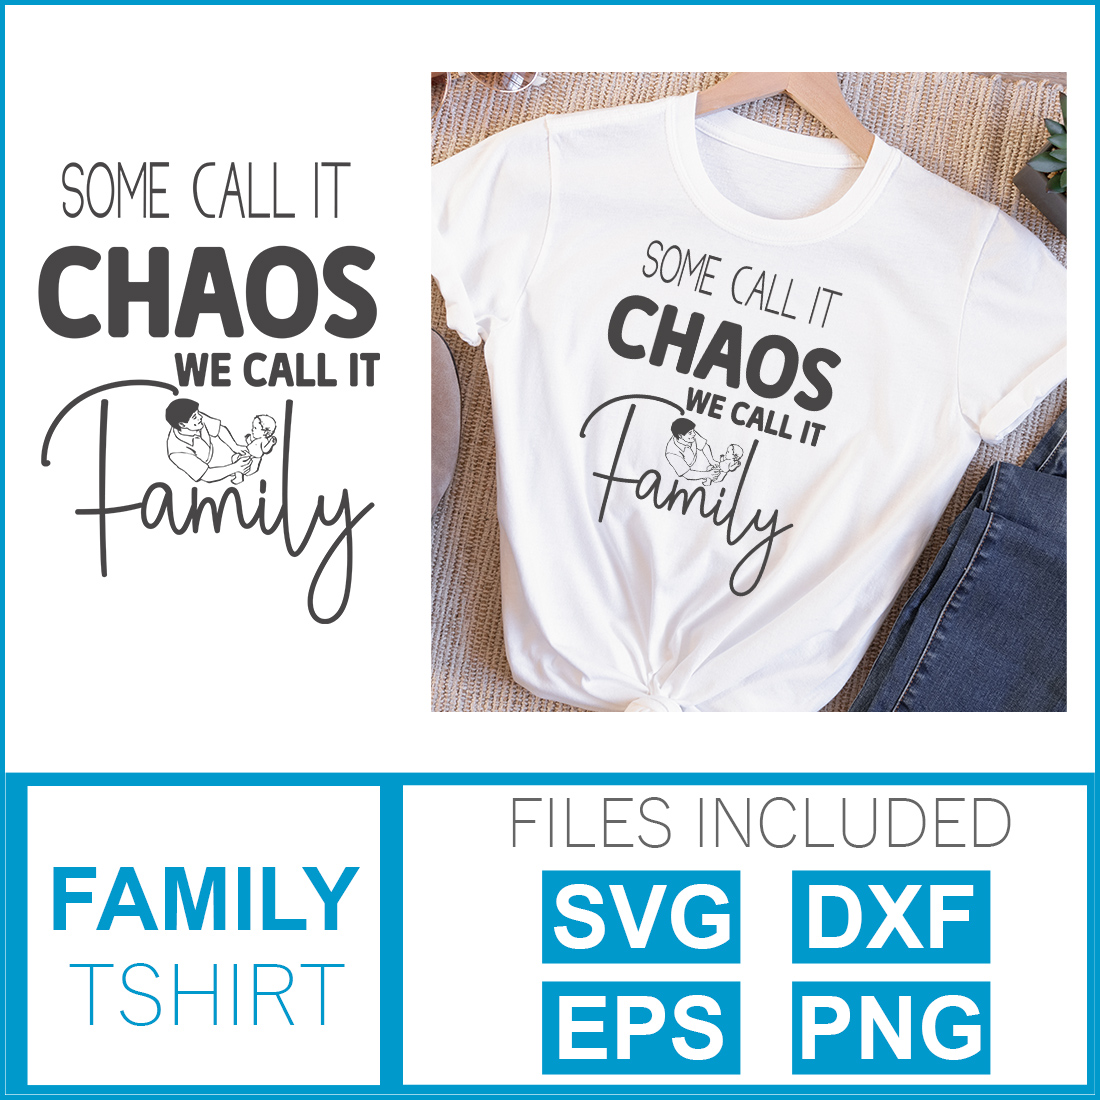 Image of a white t-shirt with a wonderful inscription "some call it chaos we call it family".